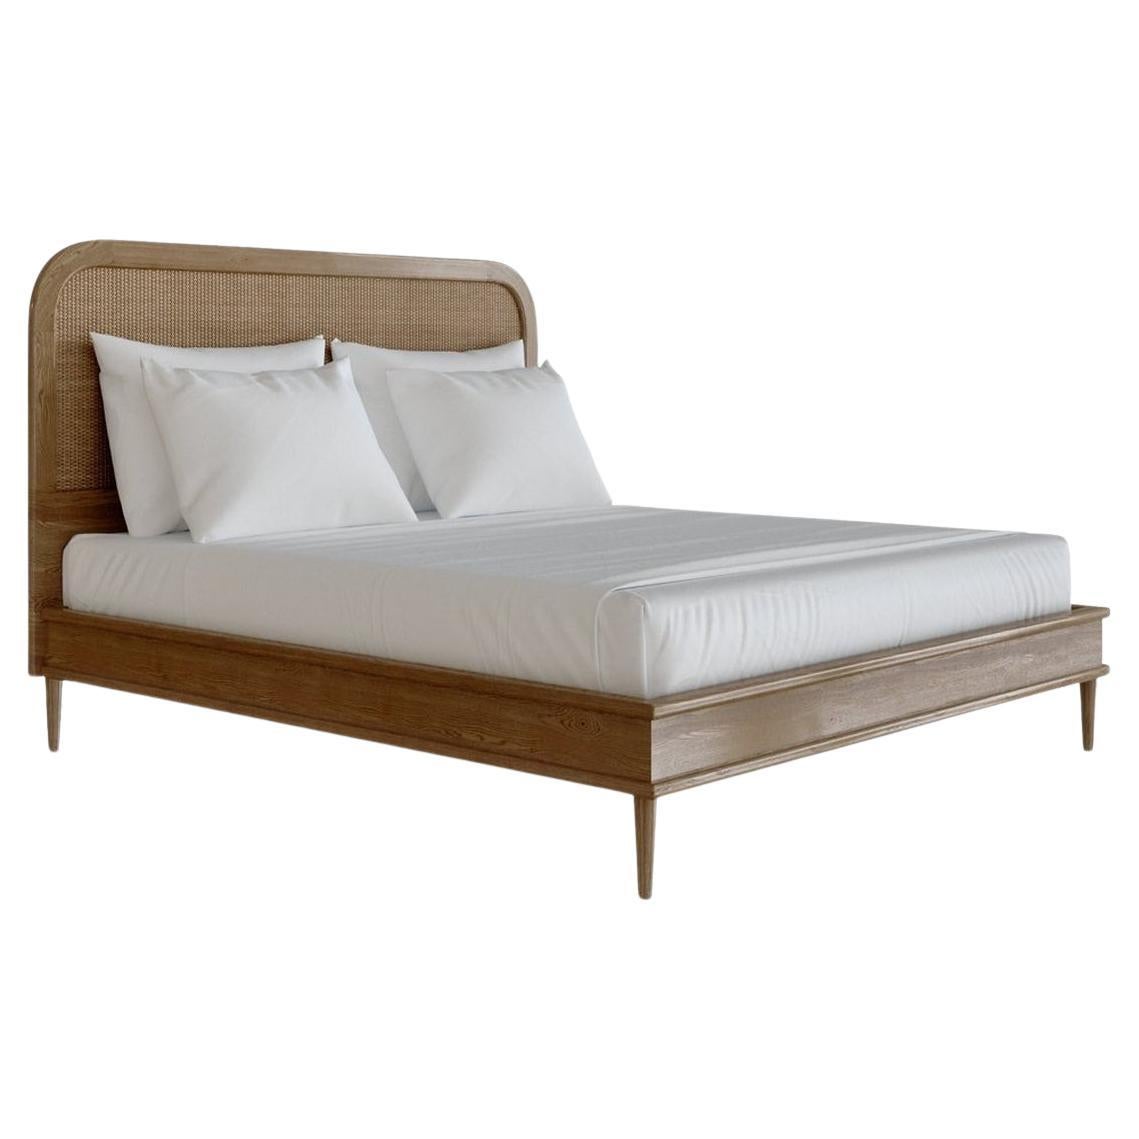 Walford Bed in Rattan & Natural Oak — Euro Super King For Sale